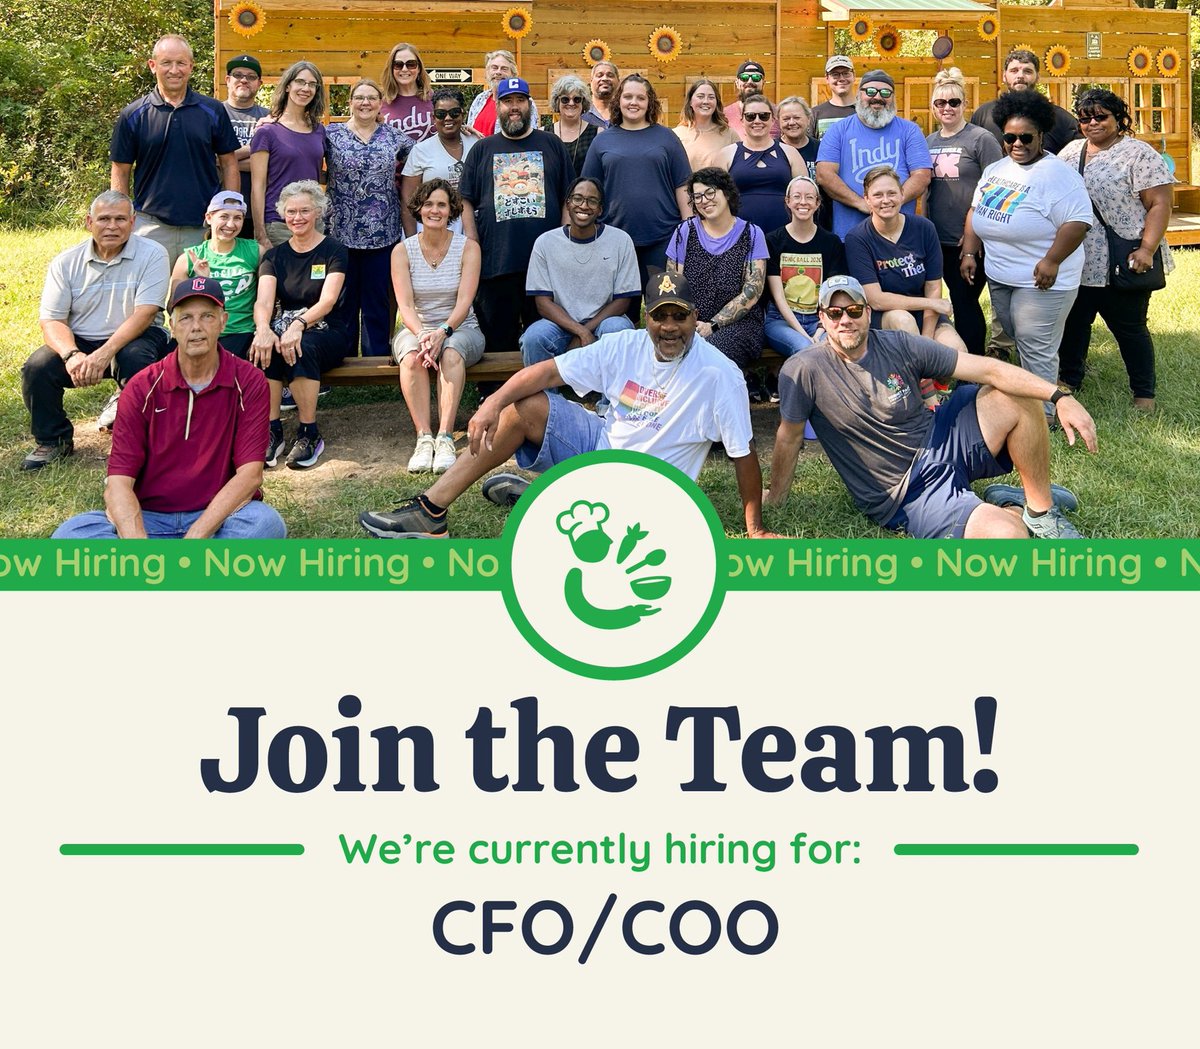 @SecondHelpings is looking for a CFO/COO. See full job description at tinyurl.com/y2exj9nw. Submit applications at tinyurl.com/3239btze by 8AM on 4/8. #NBMBAA #nbmbaaindy #secondhelpings #cfo #coo #csuite #executive #nonprofit #jobopportunity #career #role #jobs